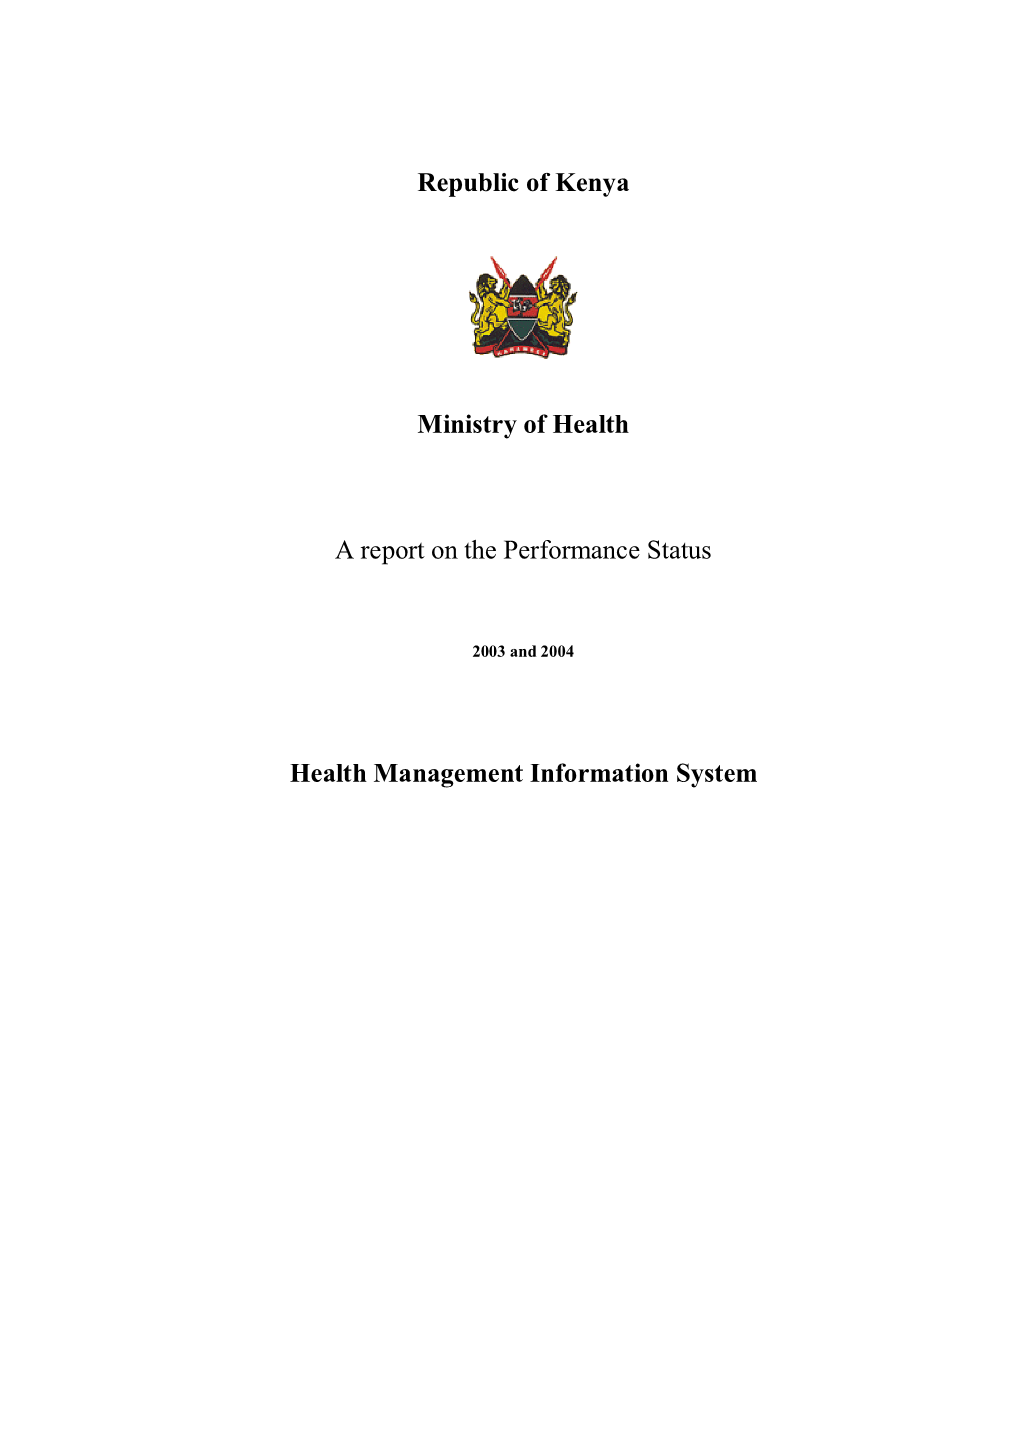 Republic of Kenya Ministry of Health a Report on the Performance Status